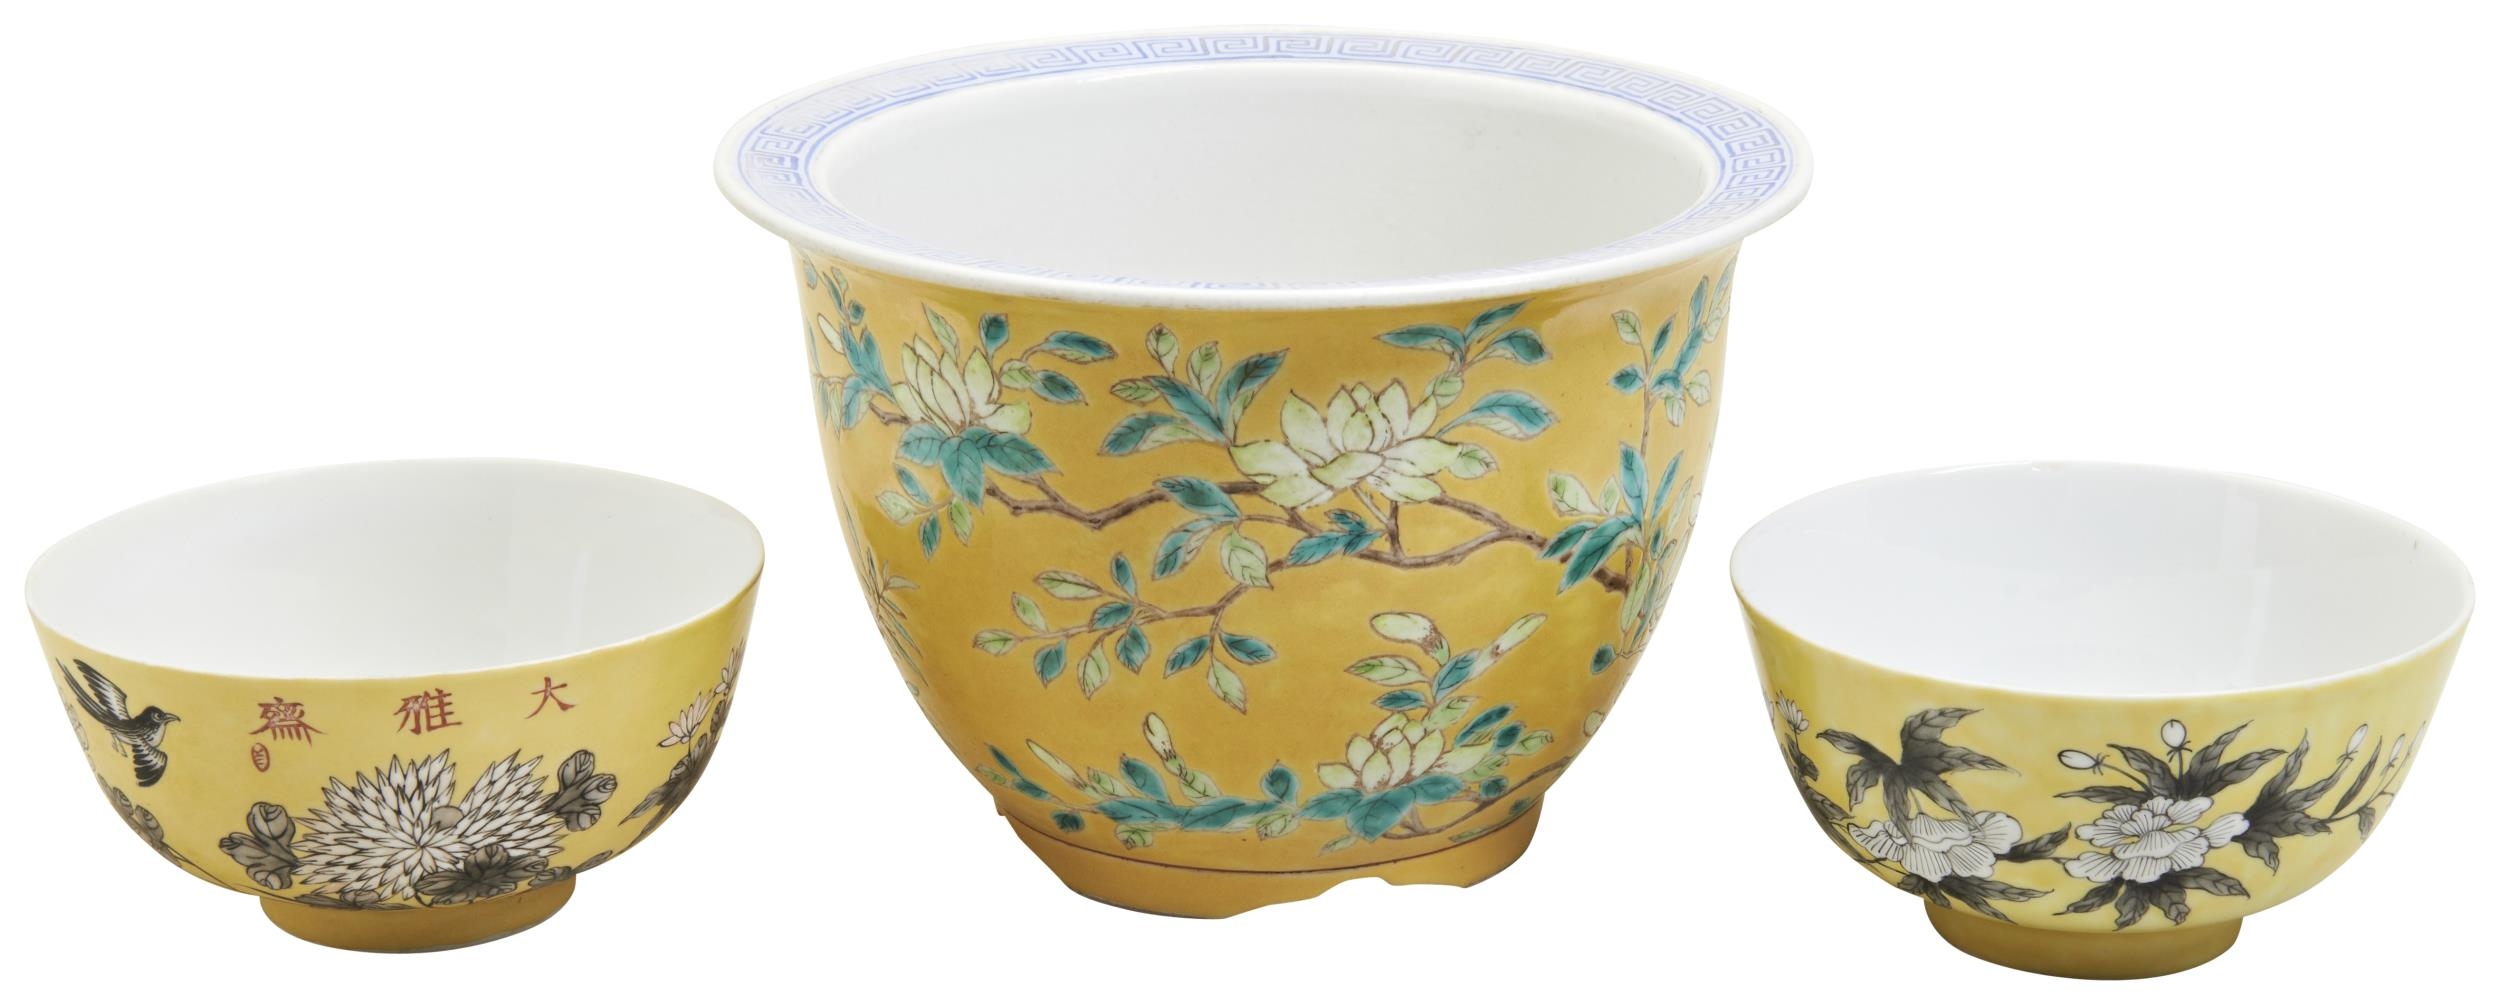 A PAIR OF FAMILLE ROSE YELLOW GROUND BOWL AND A JARDINIERE  19TH/20TH CENTURY  two yellow ground - Image 2 of 3